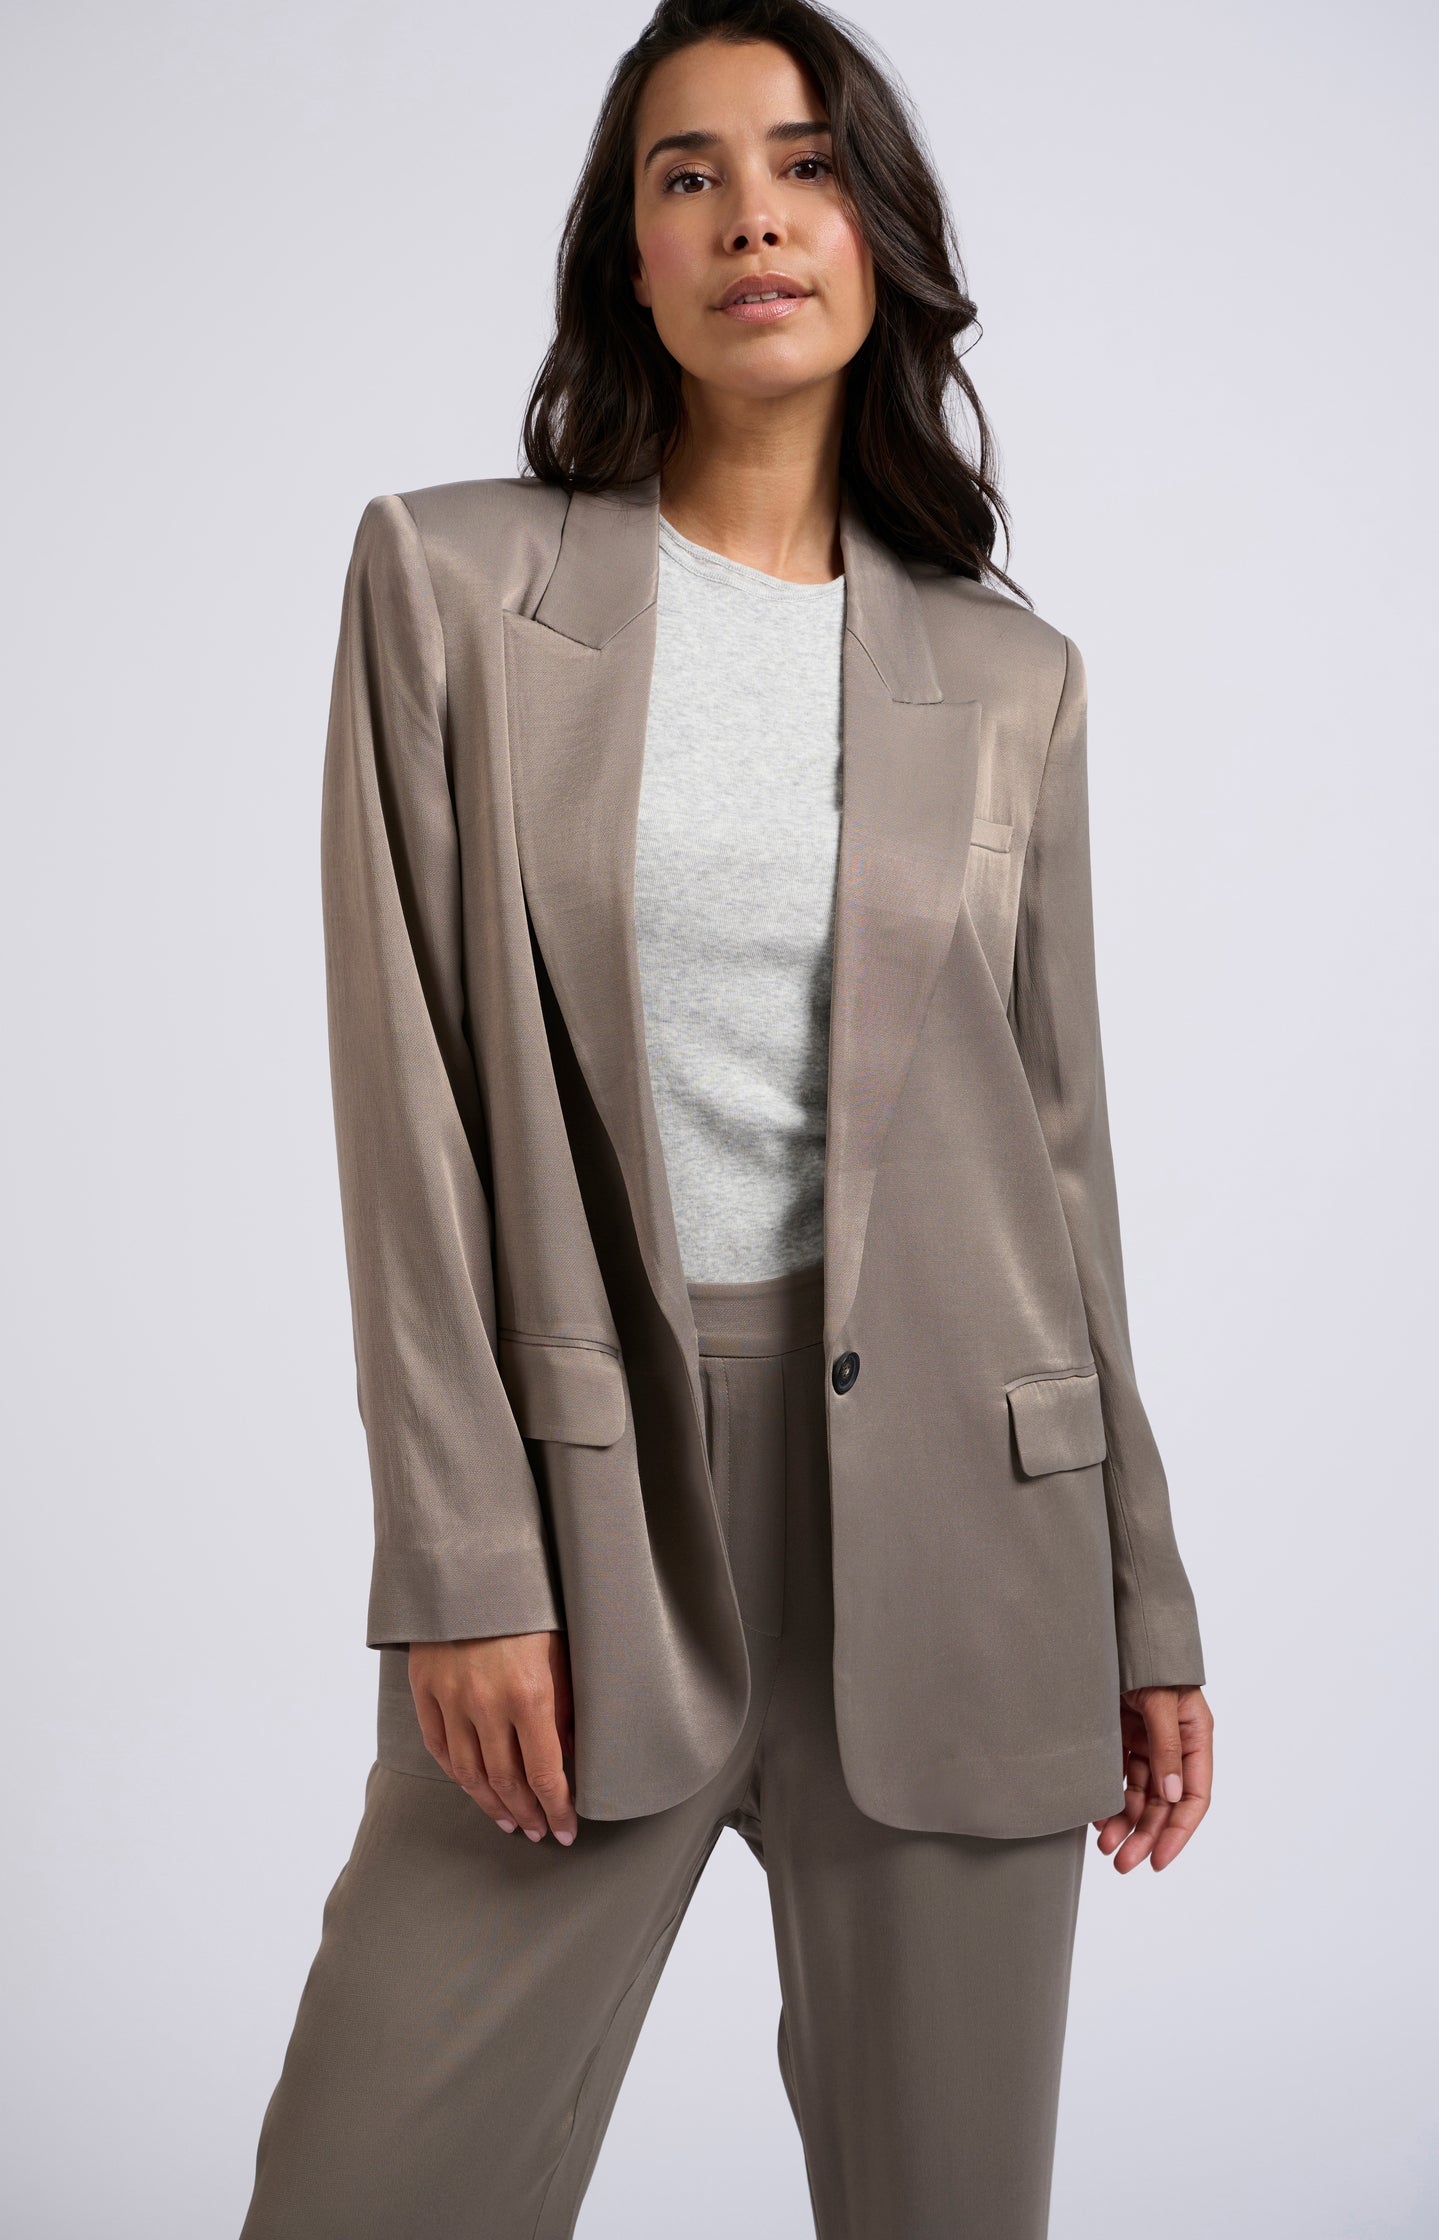 Satin blazer with chest and flap pockets and button closure